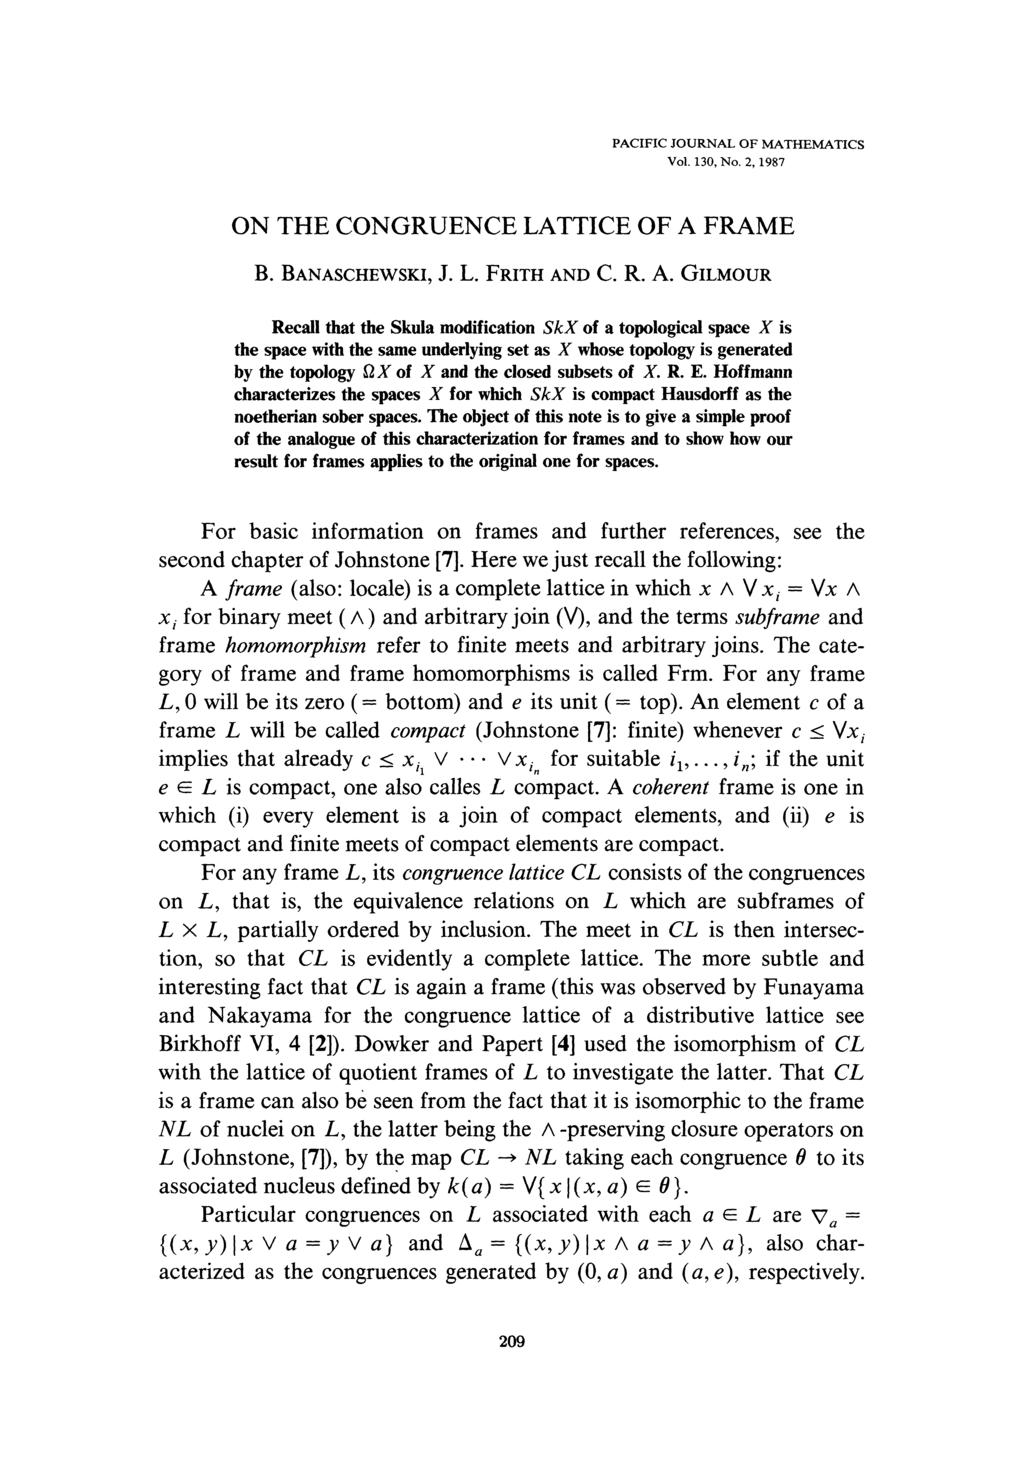 PACIFIC JOURNAL OF MATHEMATICS Vol. 130, No. 2,1987 ON THE CONGRUENCE LATTICE OF A 